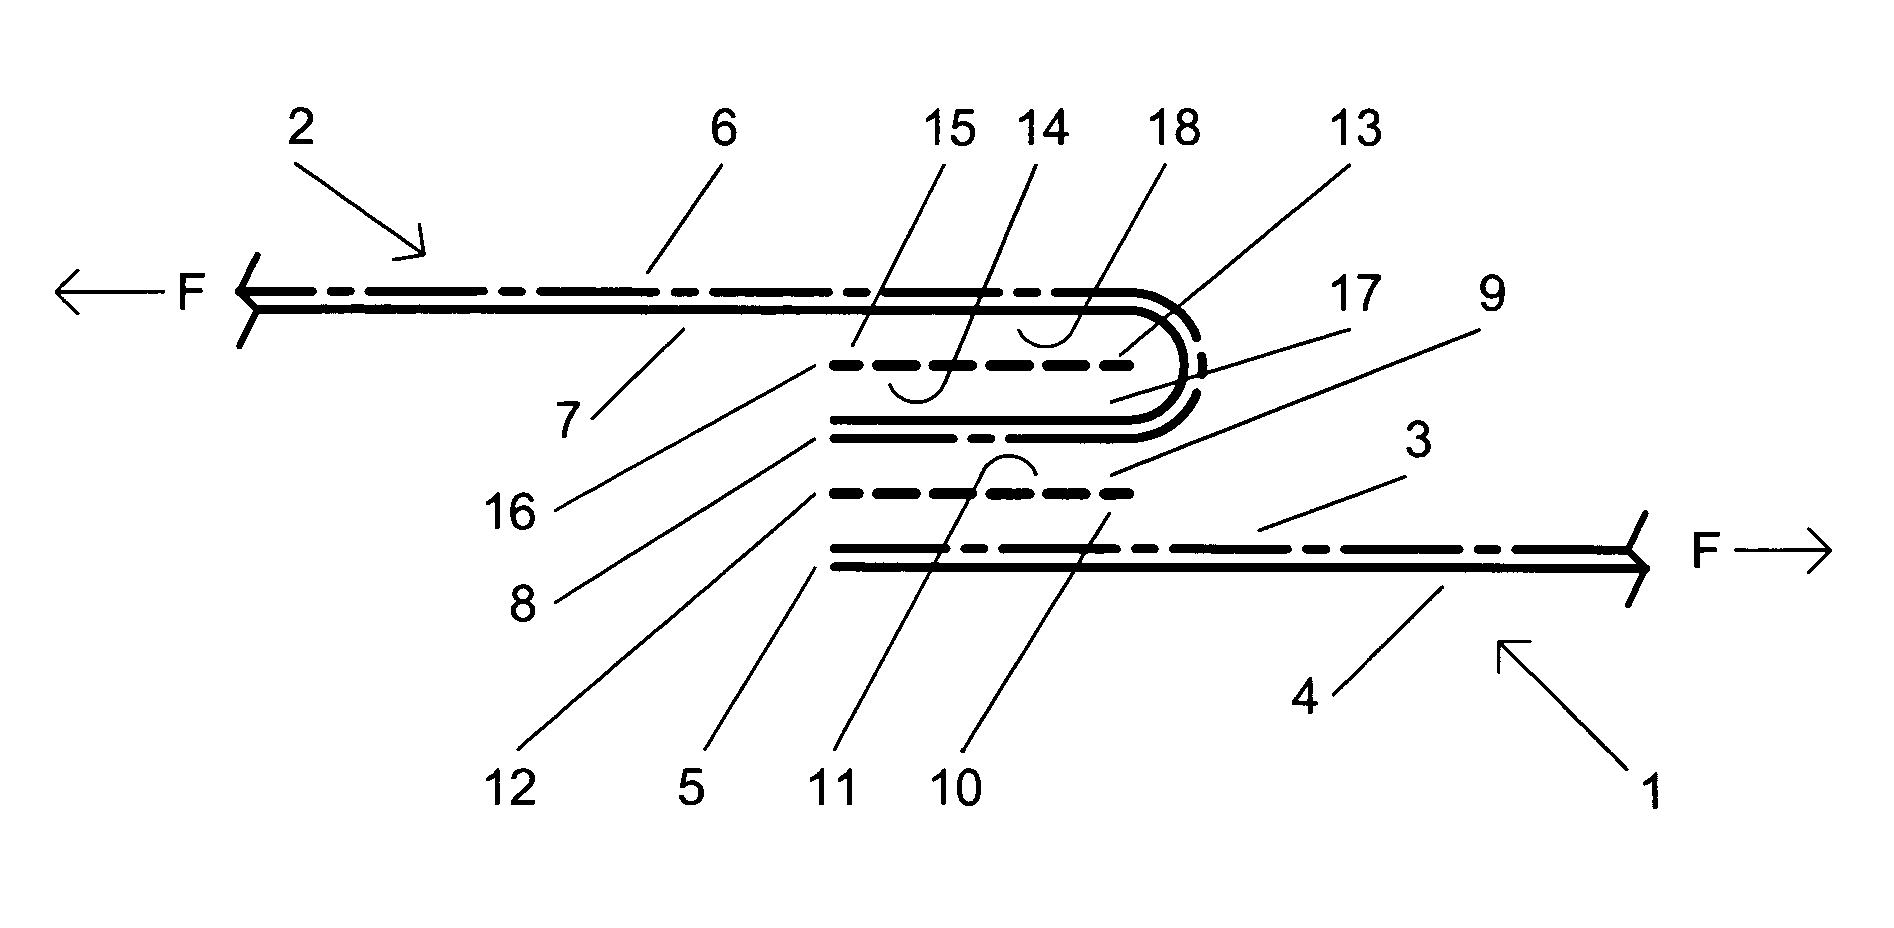 Method of forming and adhesively bonded seam